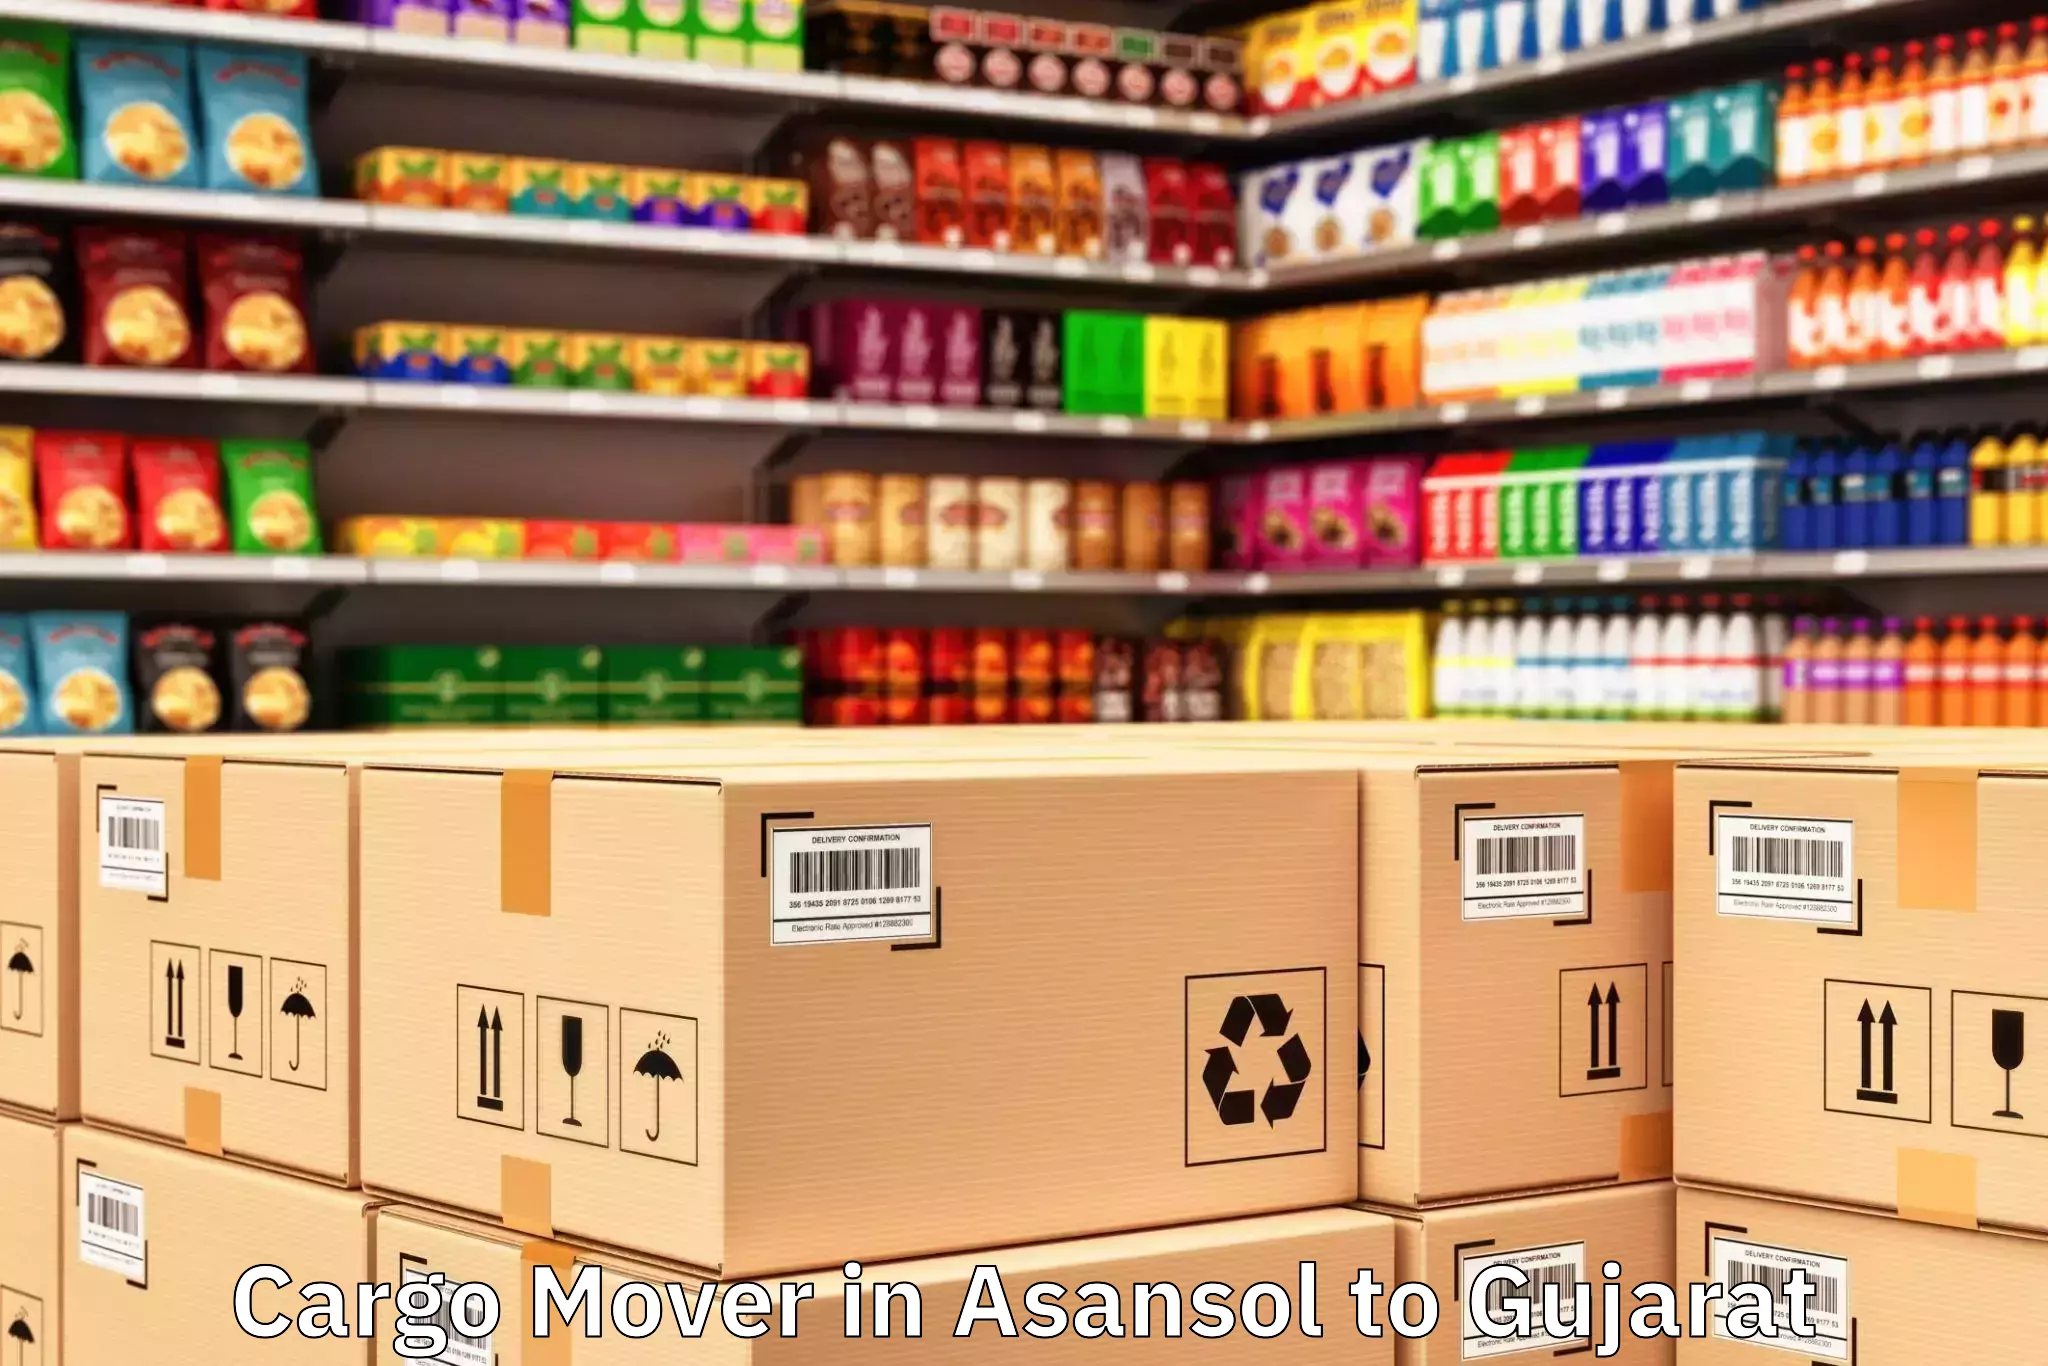 Hassle-Free Asansol to Sidhpur Cargo Mover